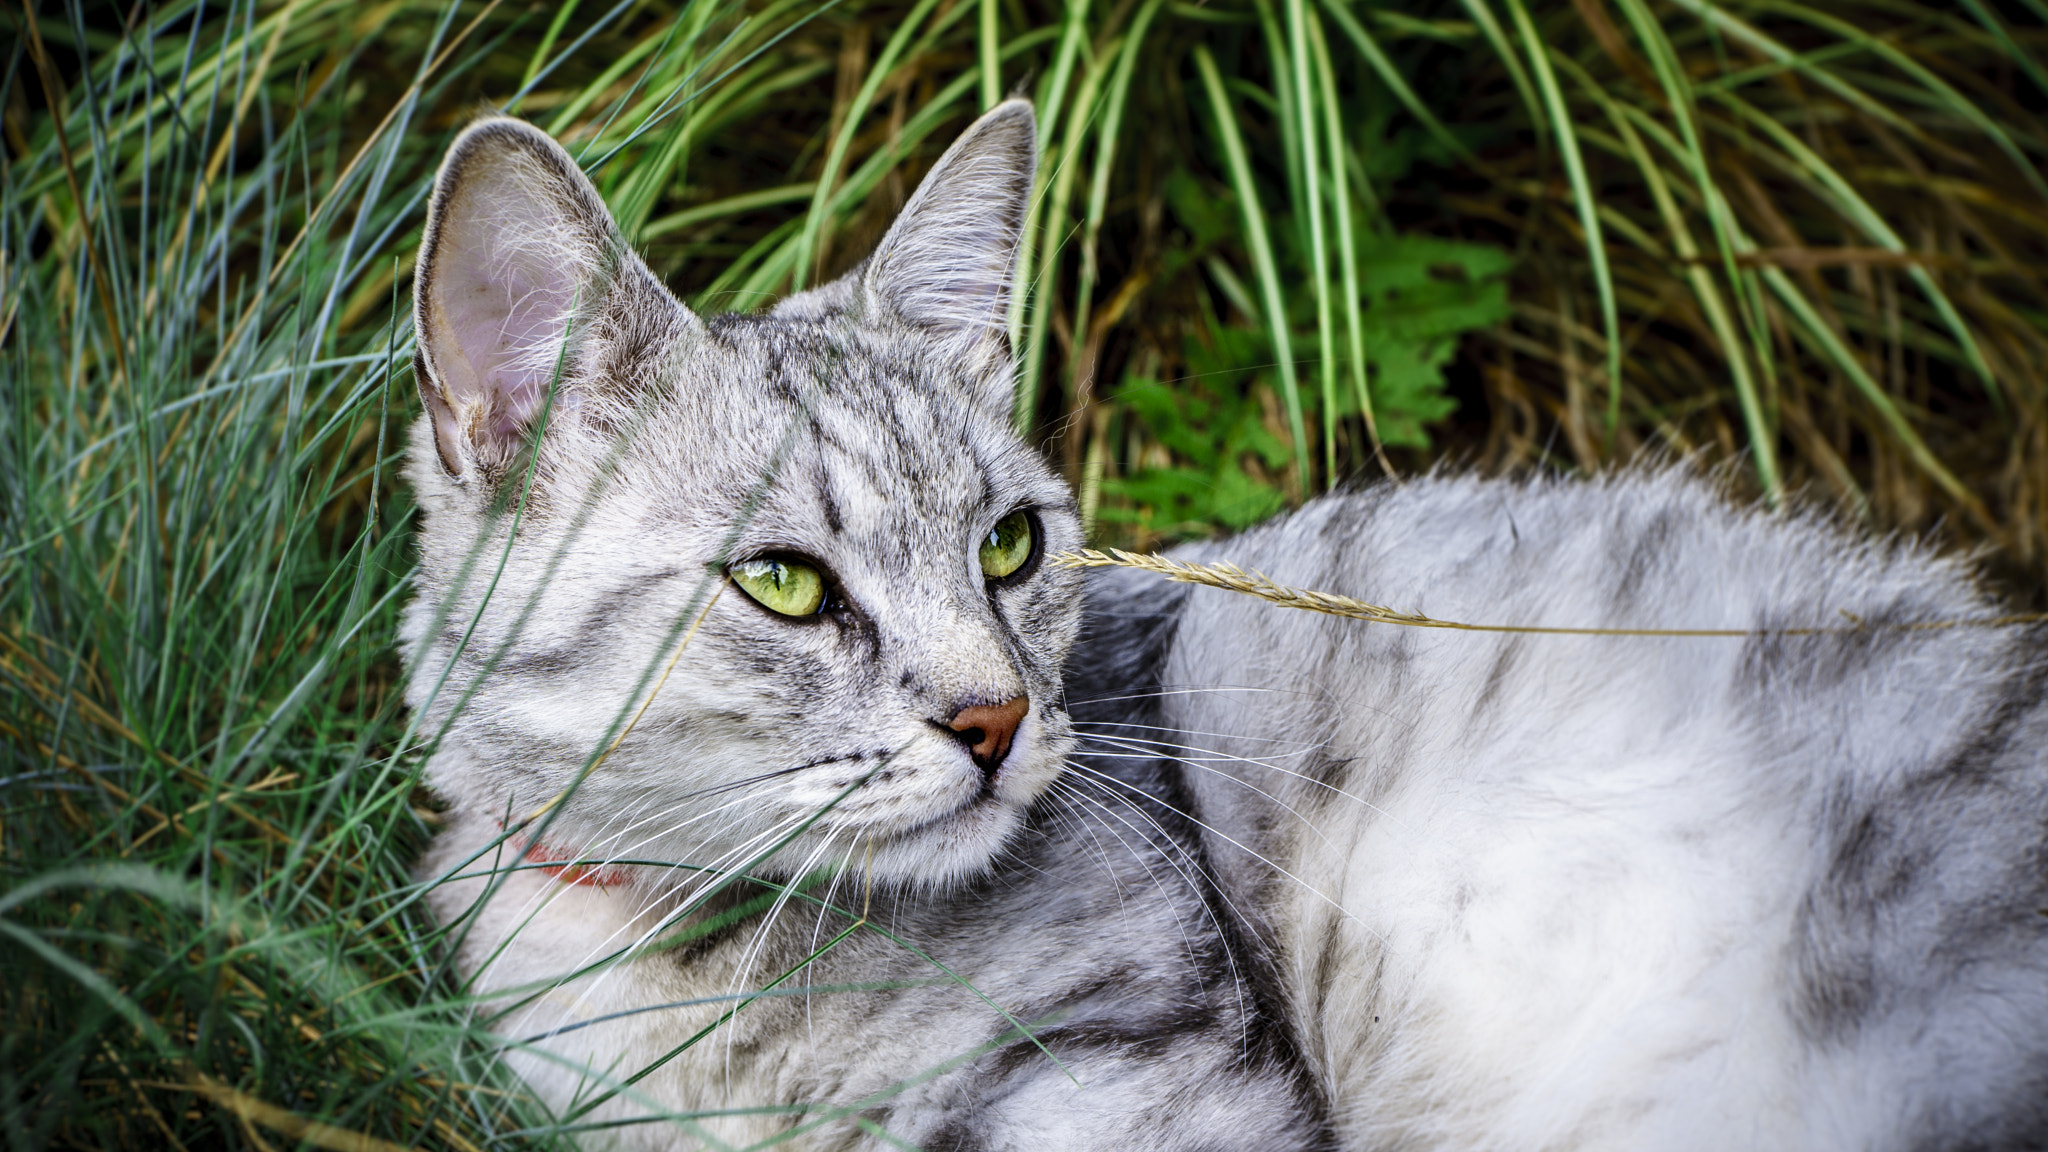 Sony a7 II + Tamron 18-270mm F3.5-6.3 Di II PZD sample photo. Cat in the grass photography